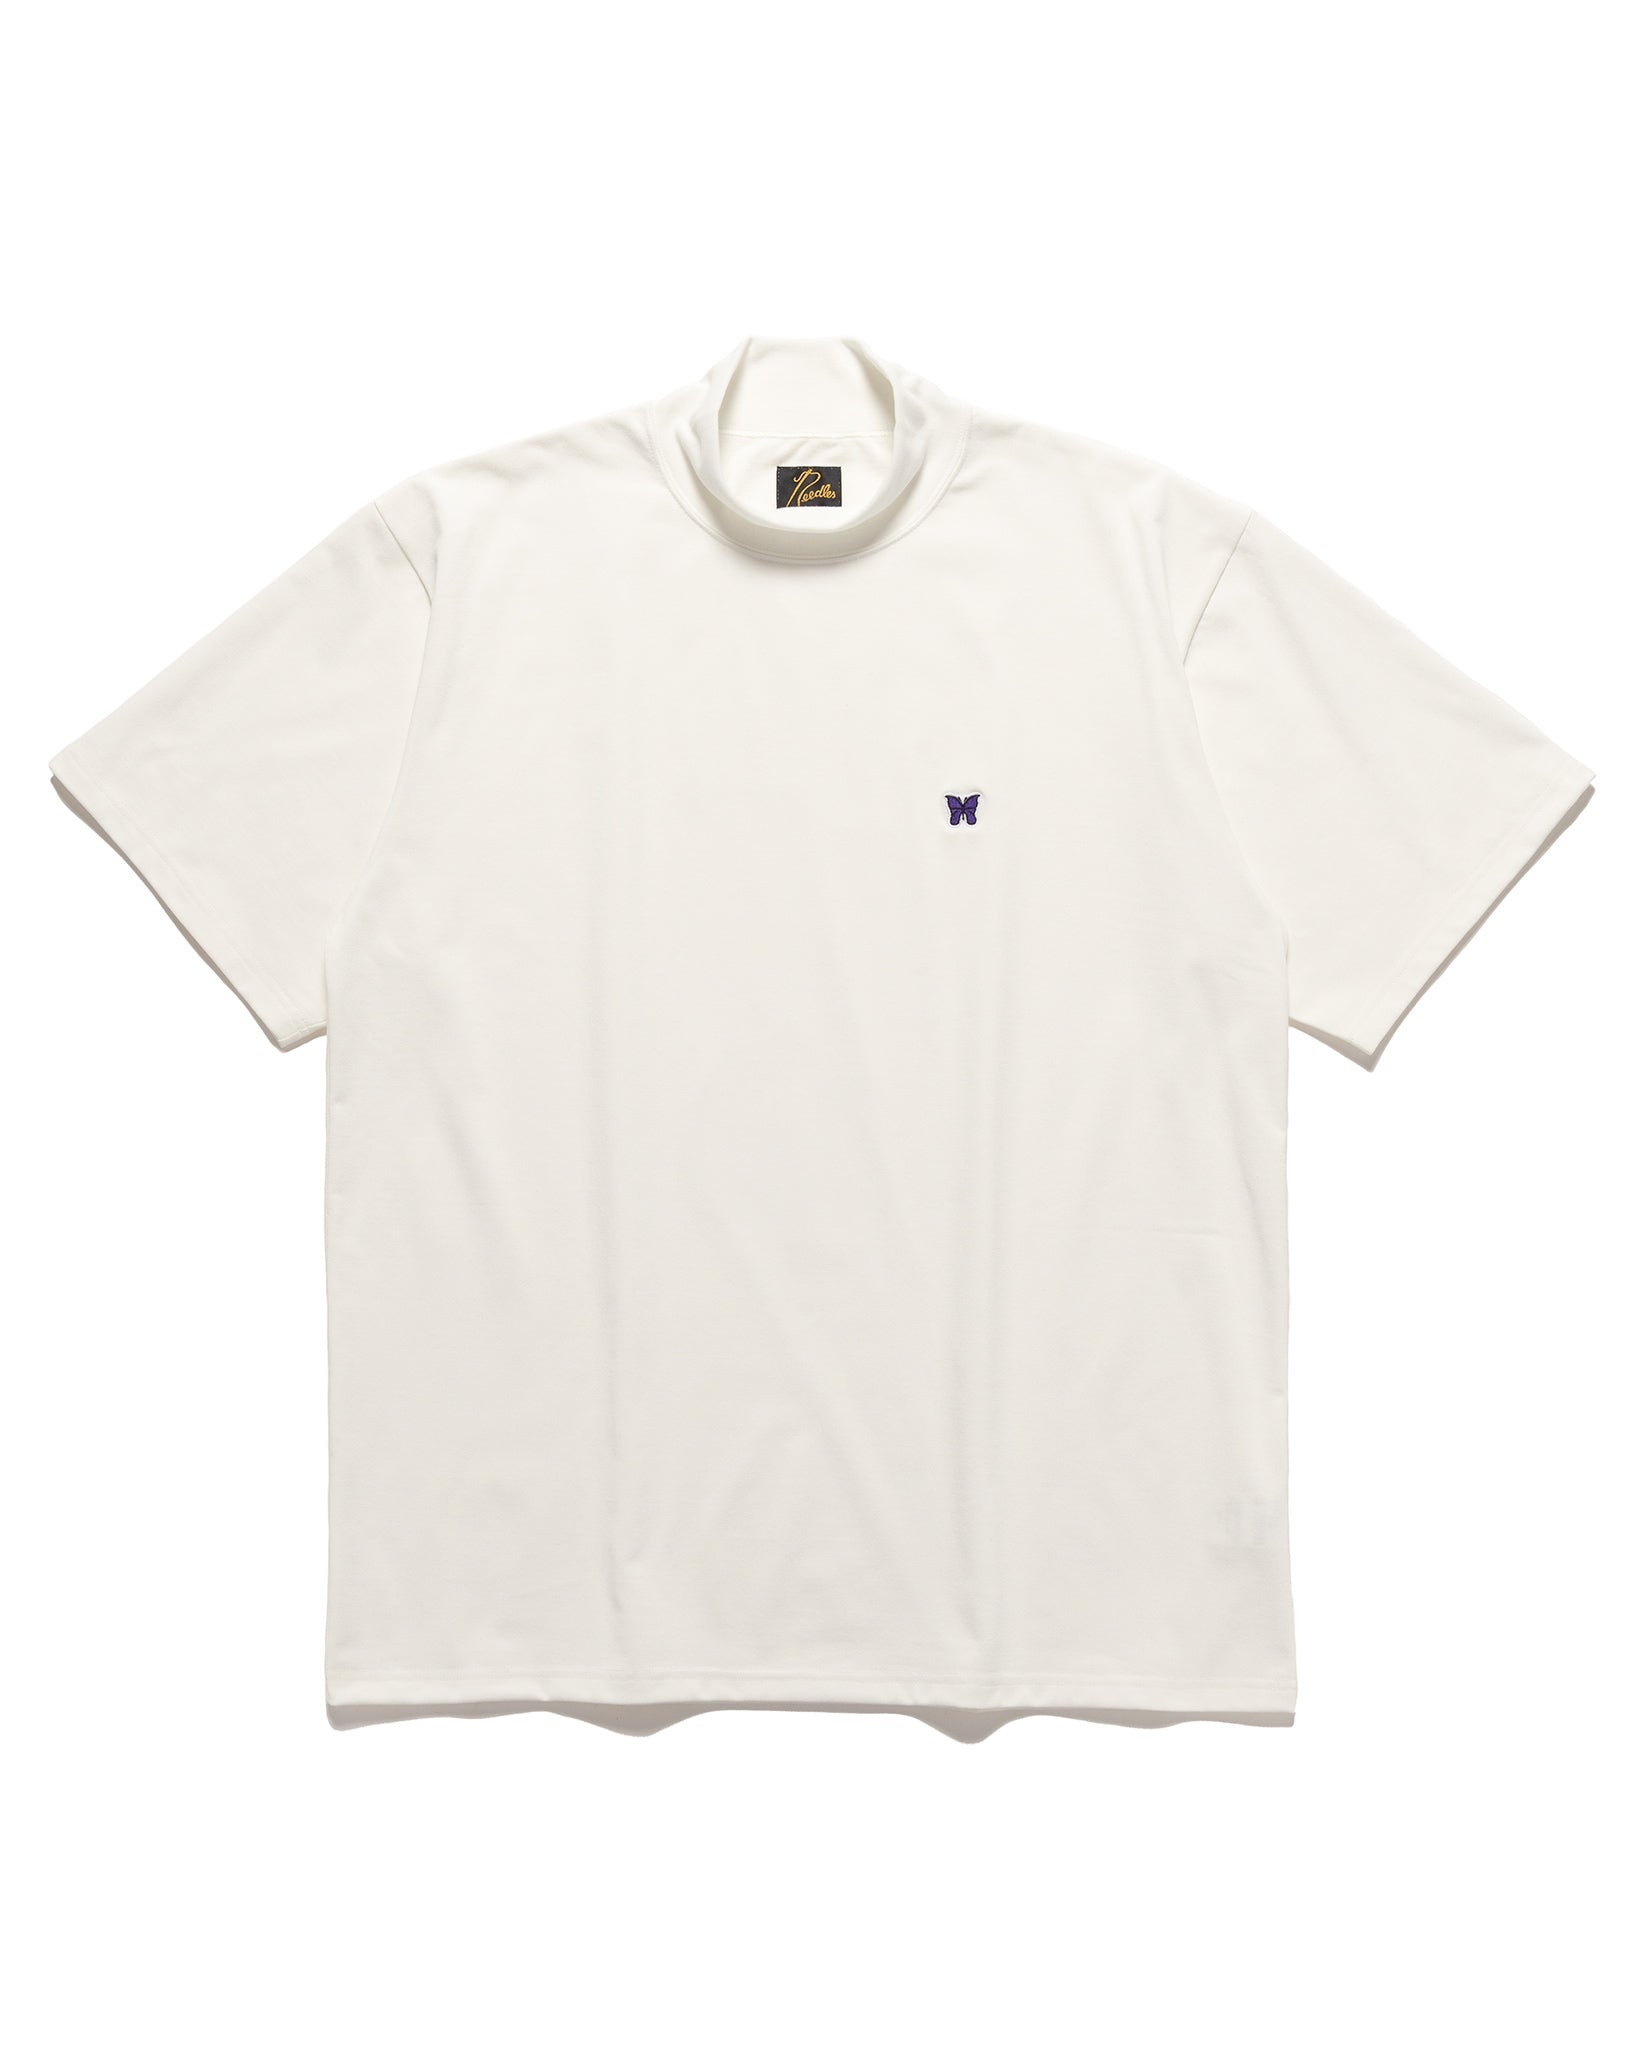 S/S Mock Neck Tee - Poly Jersey White - 1